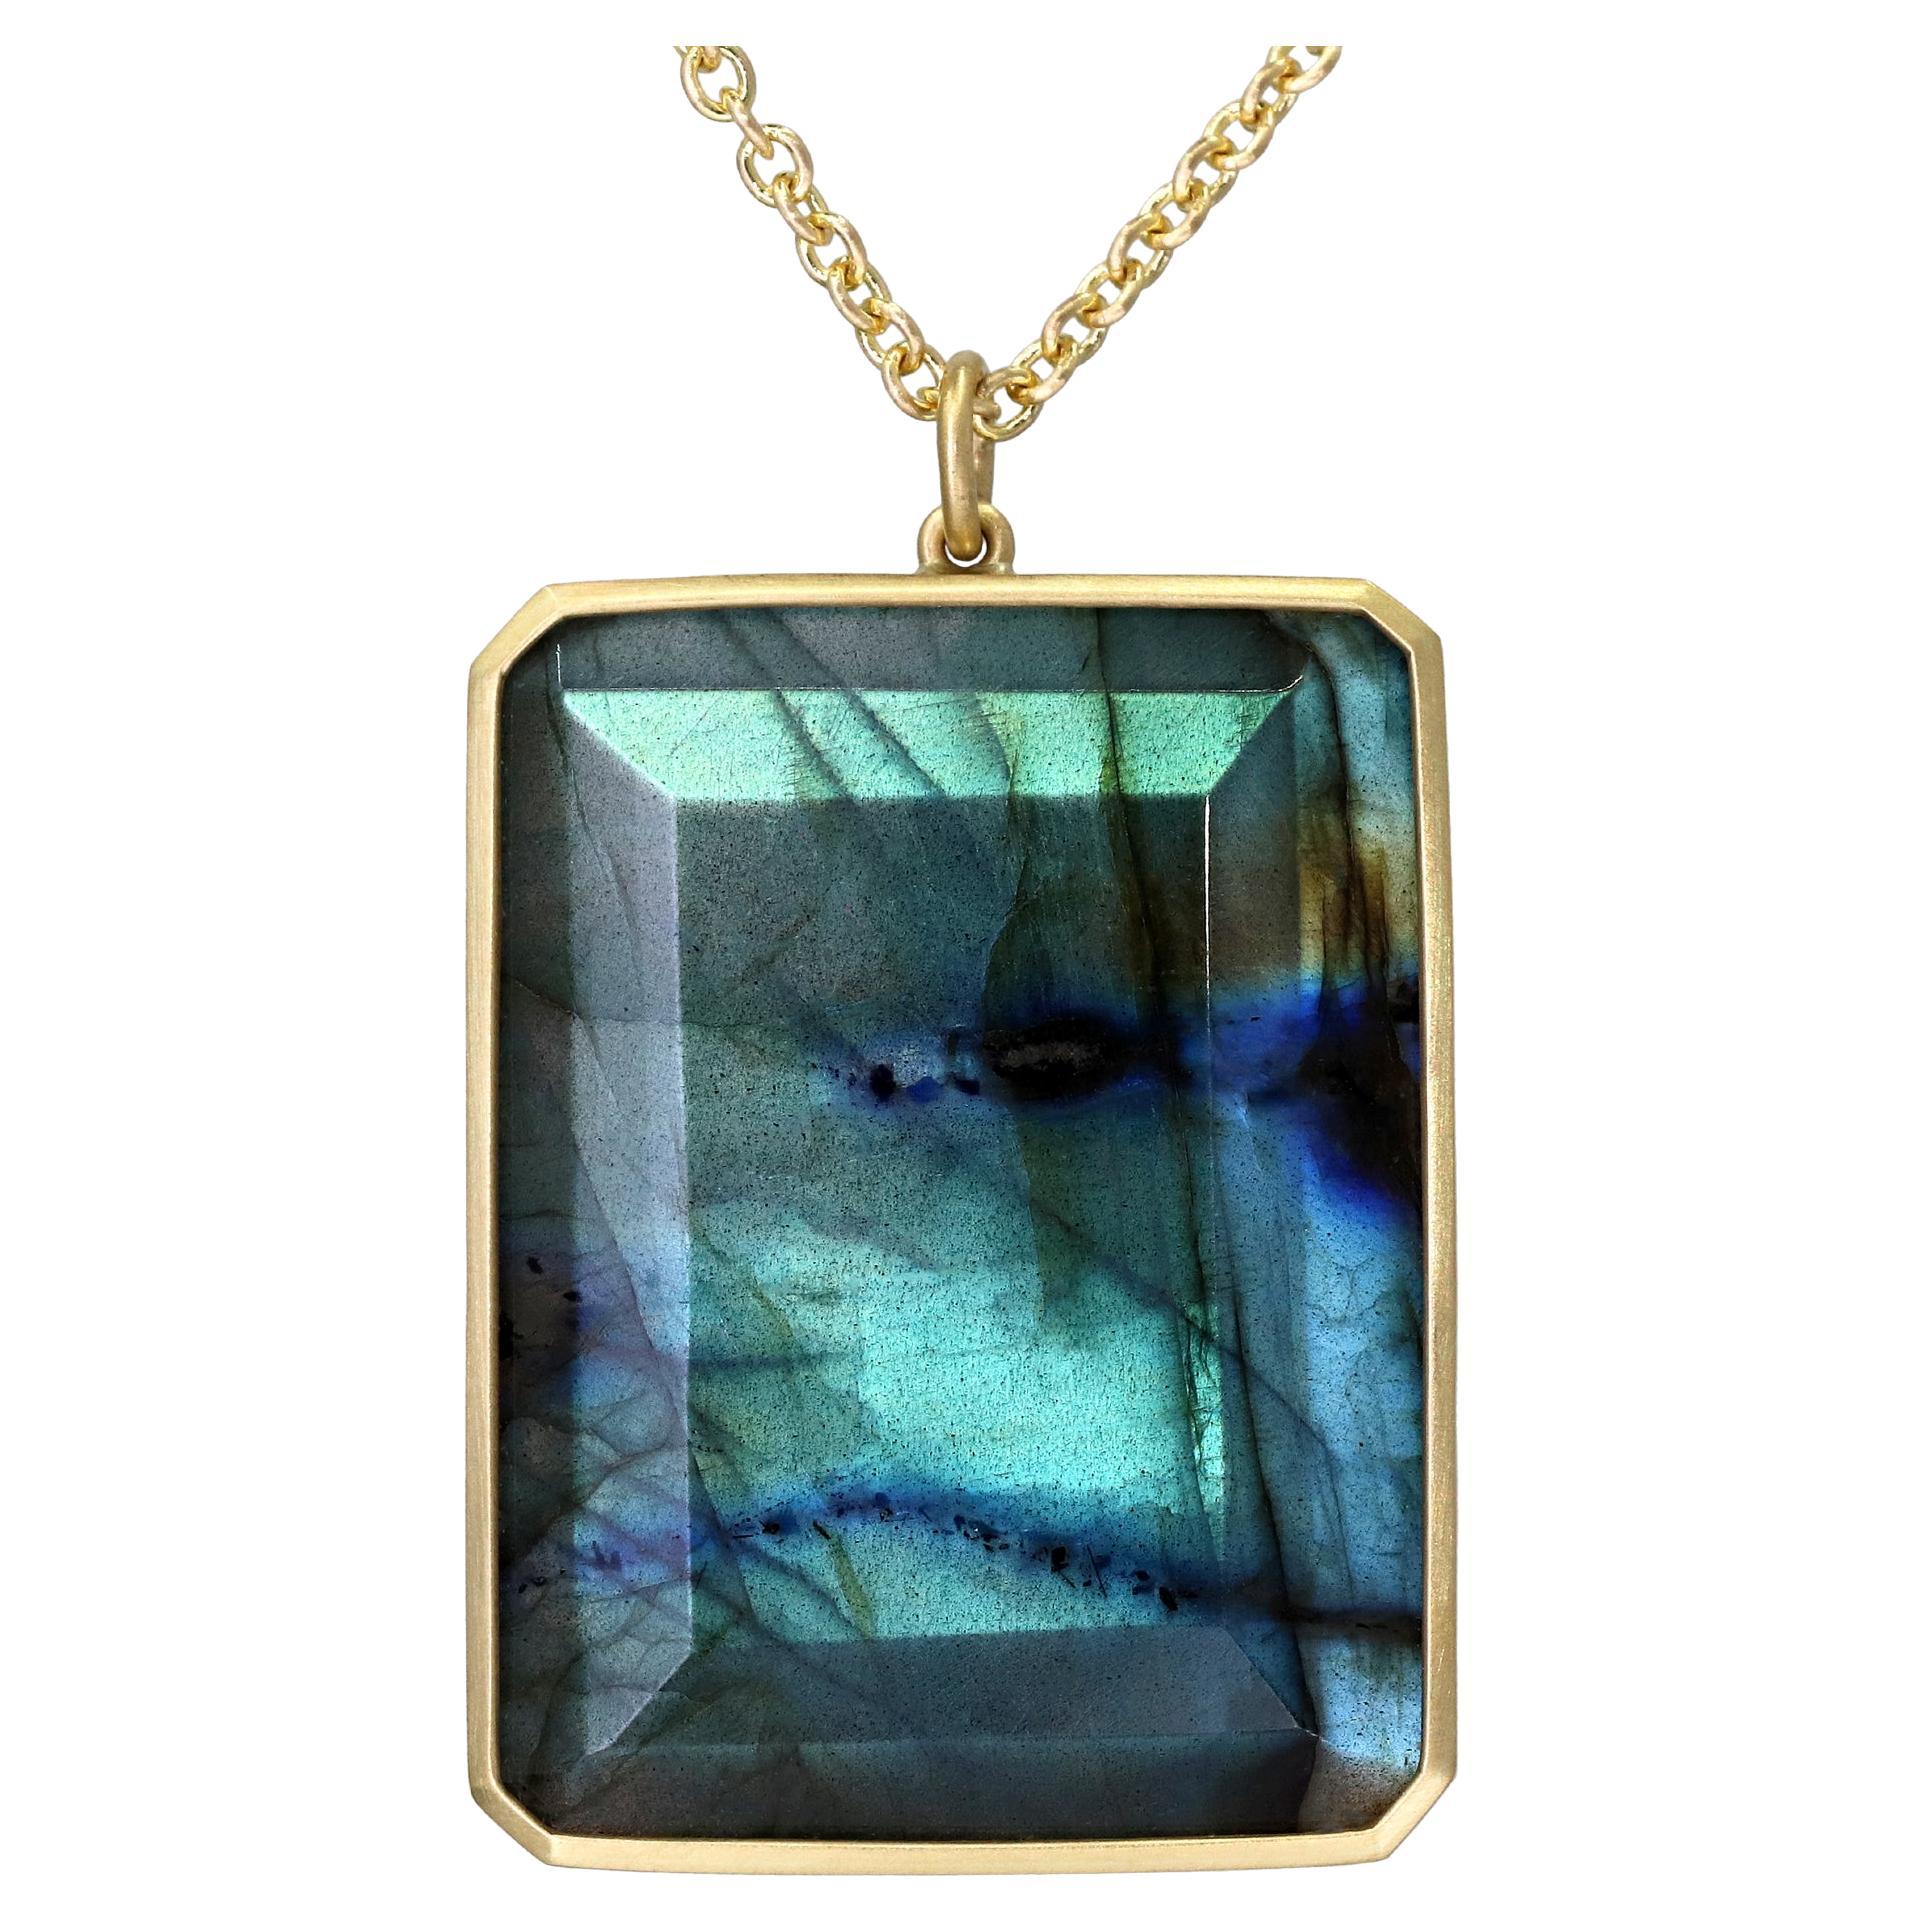 Faceted Labradorite Octagon One of a Kind Pendant Necklace, Lola Brooks 2022